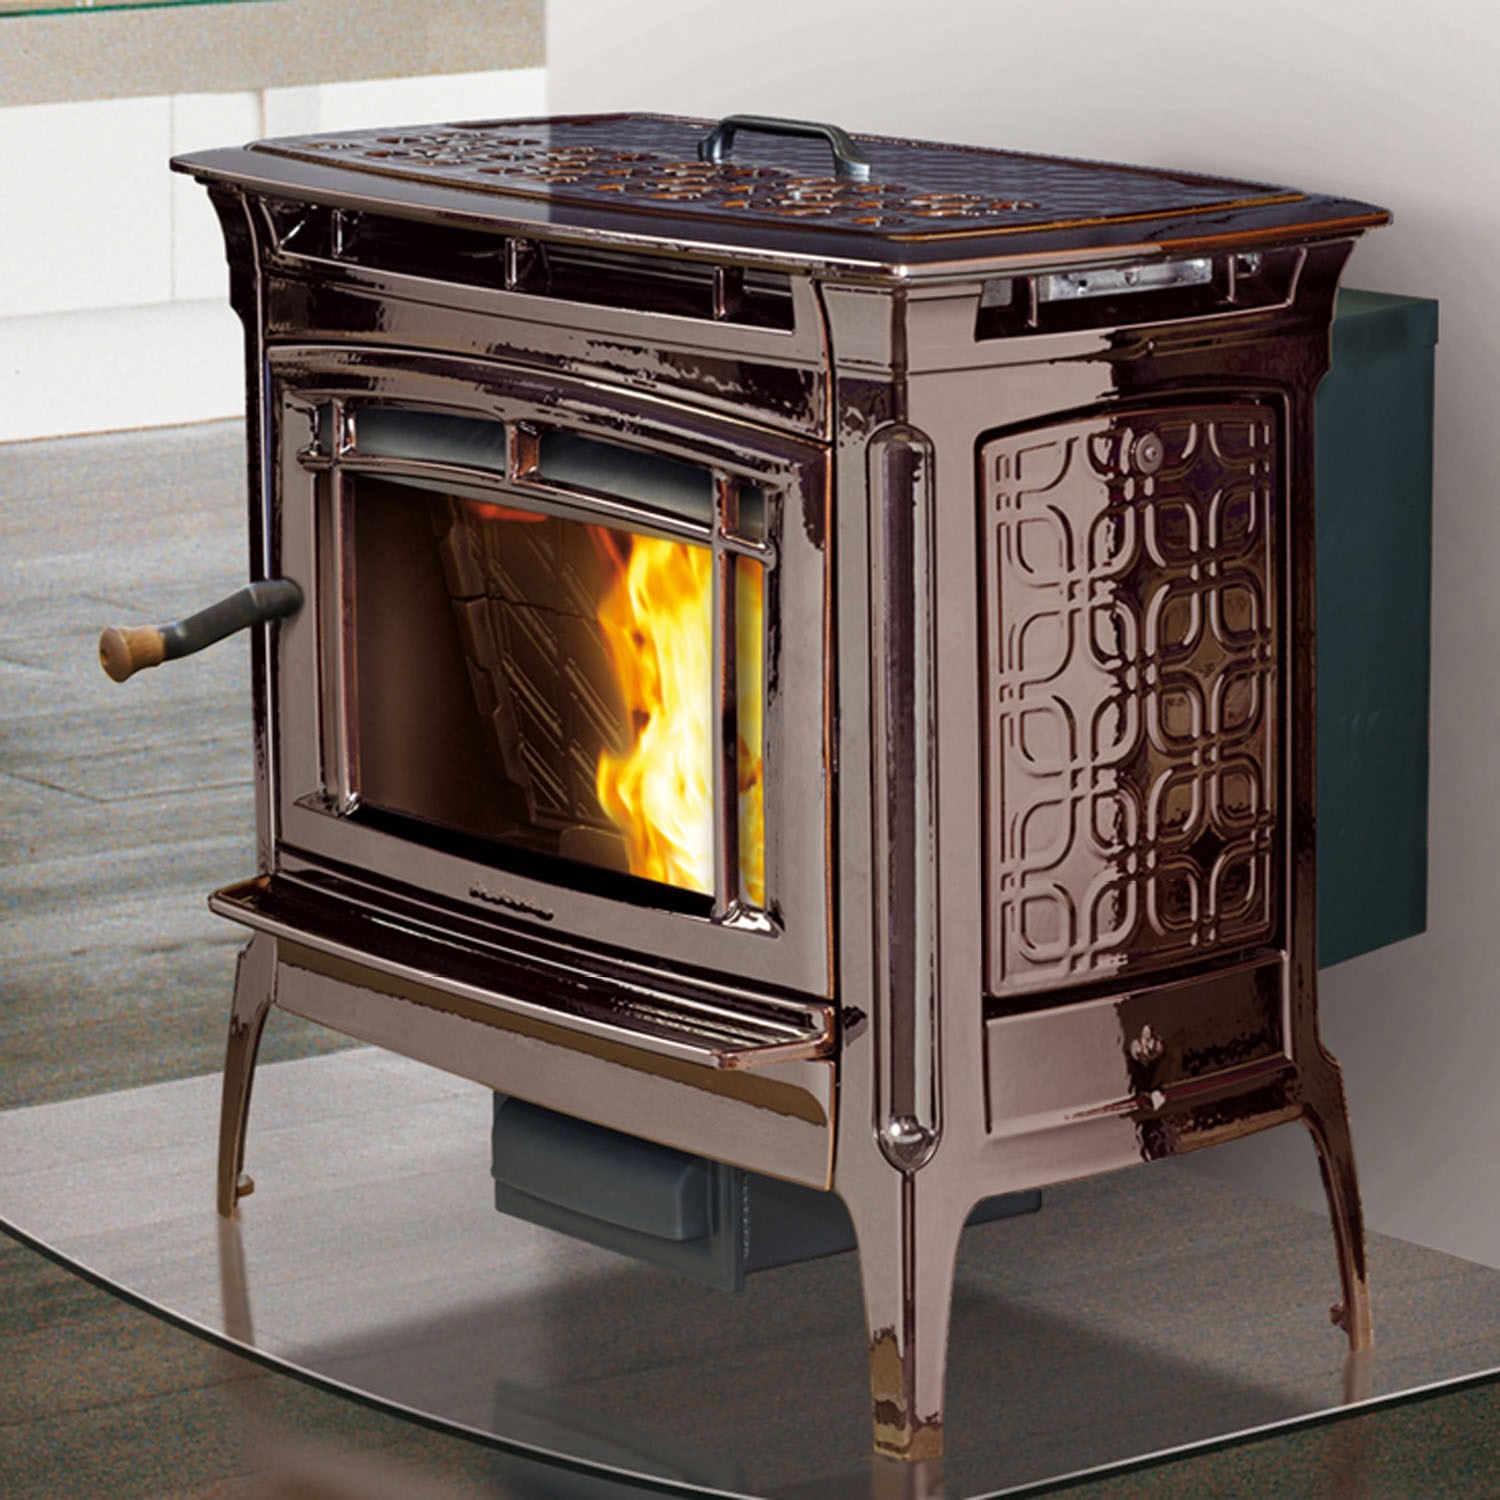 hearthstone-pellet-stoves-maryland-tri-county-hearth-and-patio